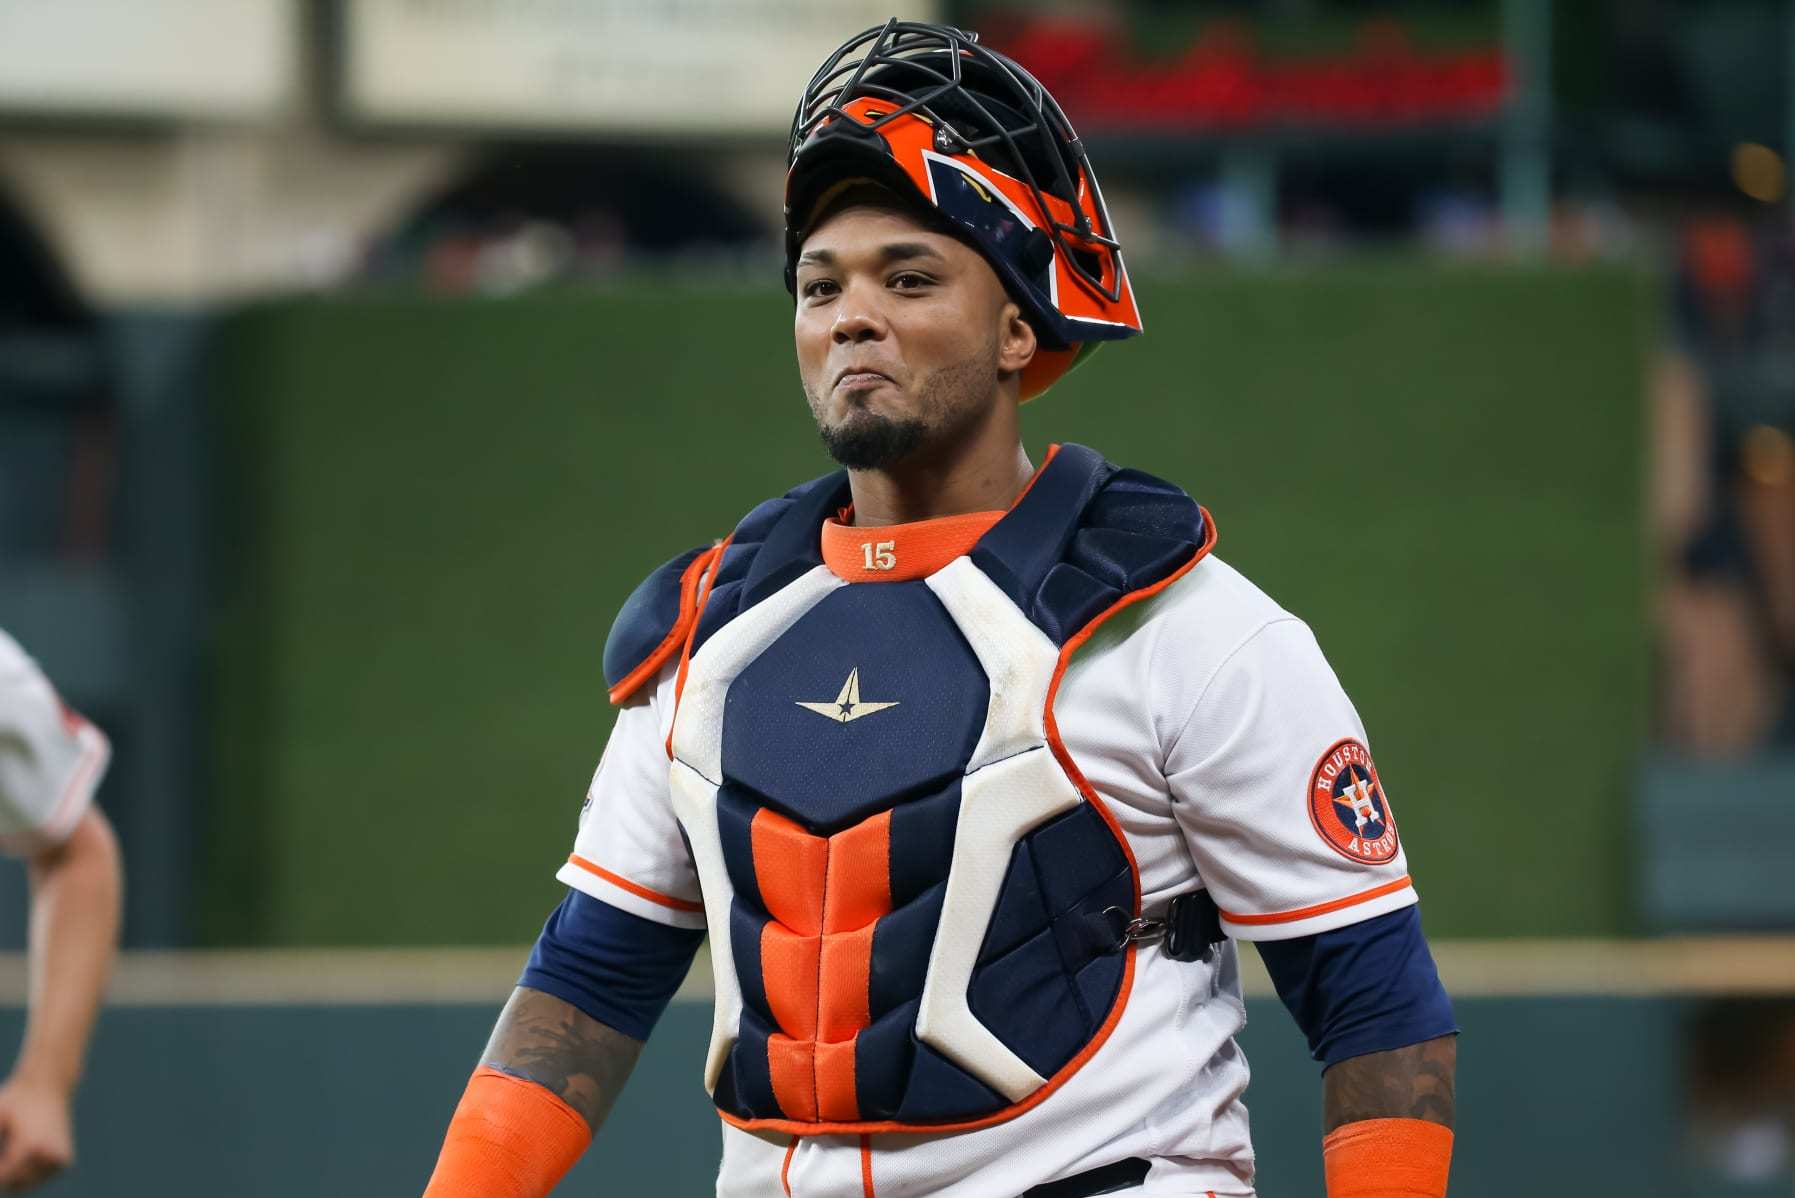 Why Houston's catchers, worst-hitting tandem in MLB, are so